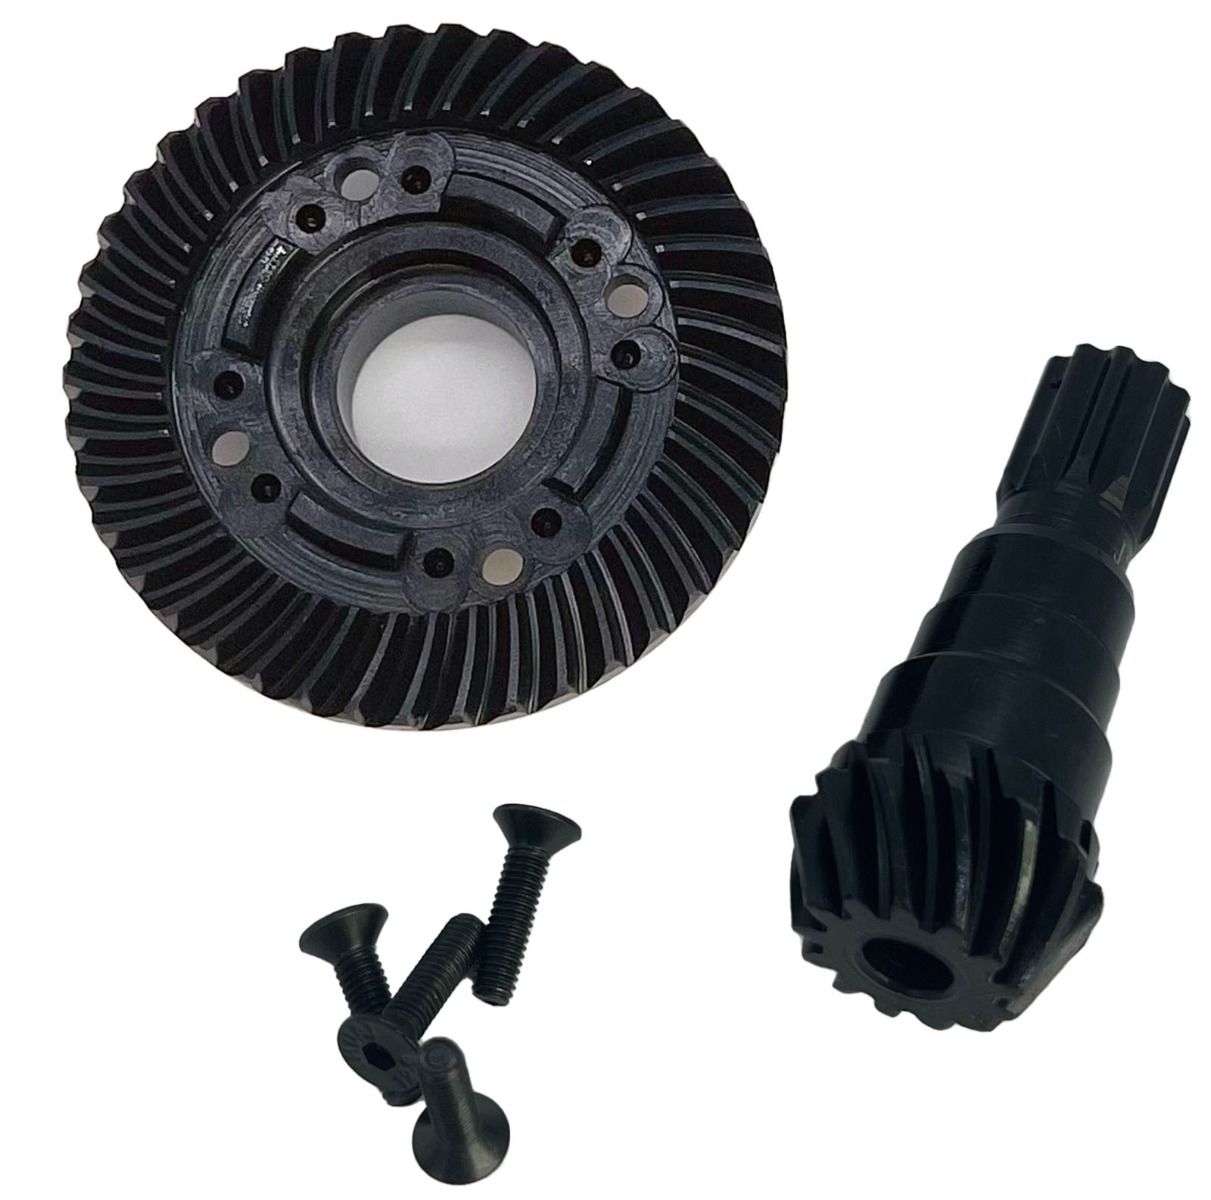 Powerhobby 32T / 10T Front Differential Steel Gears FOR Traxxas X-Maxx - PowerHobby